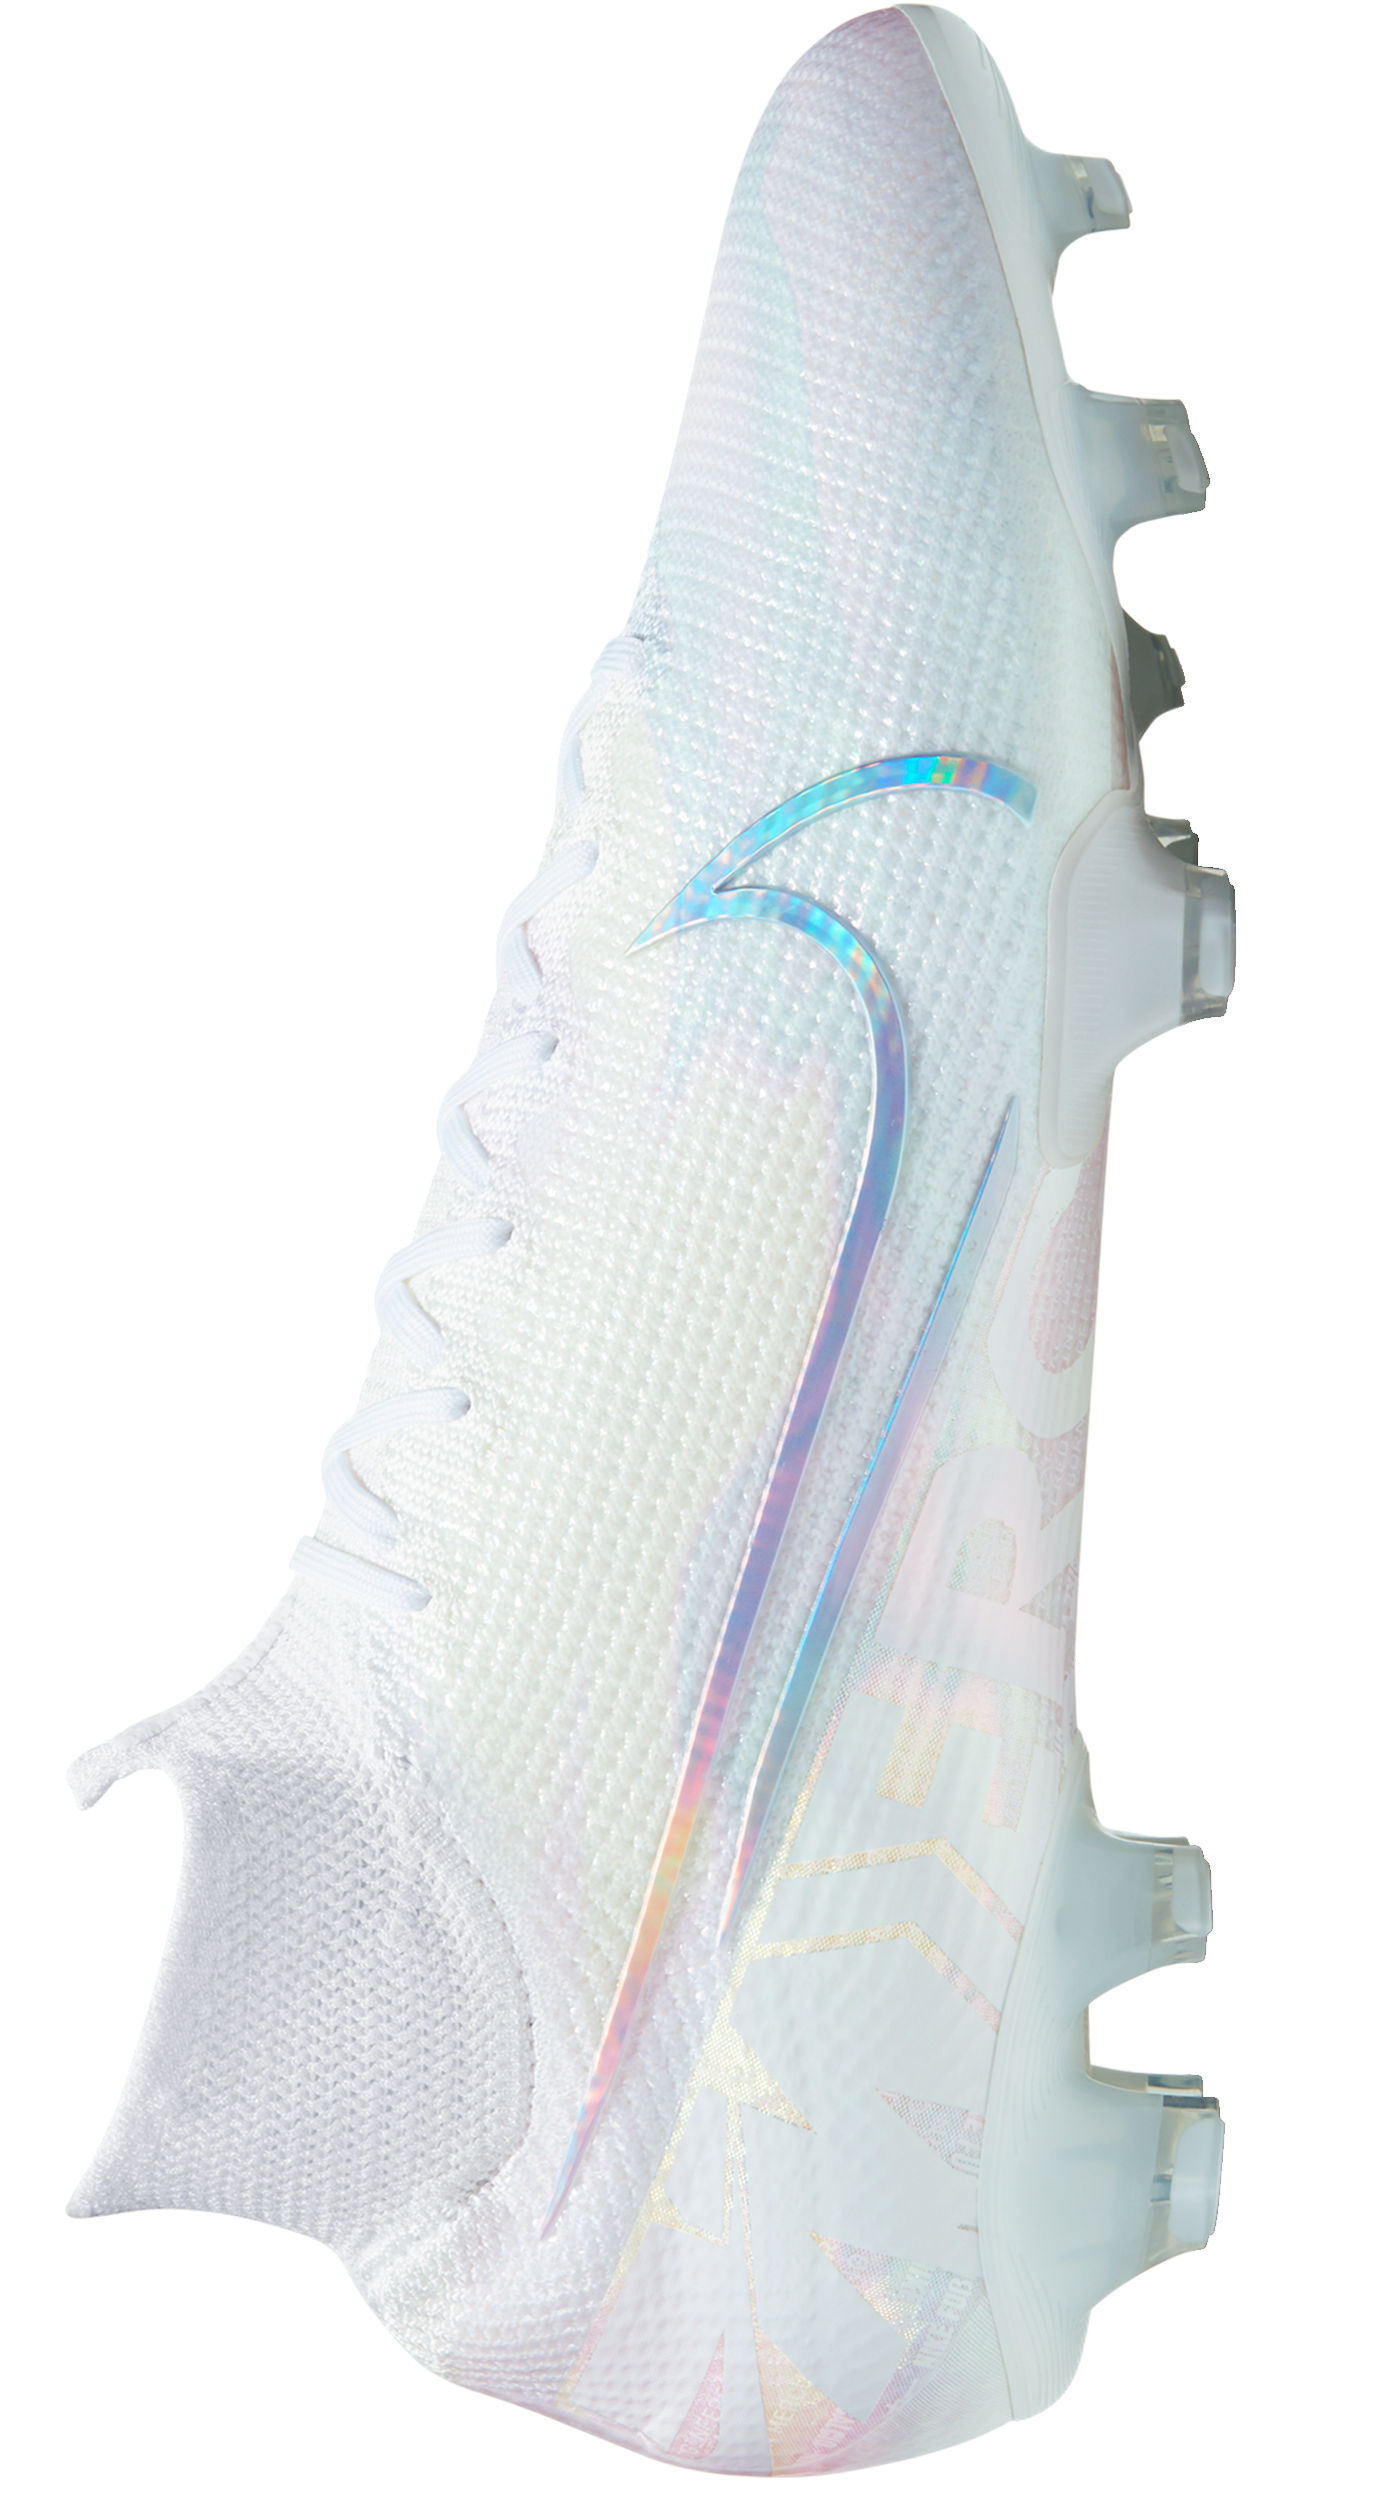 Nike Mercurial Superfly 7 Elite FG Mens Cleats Under The.